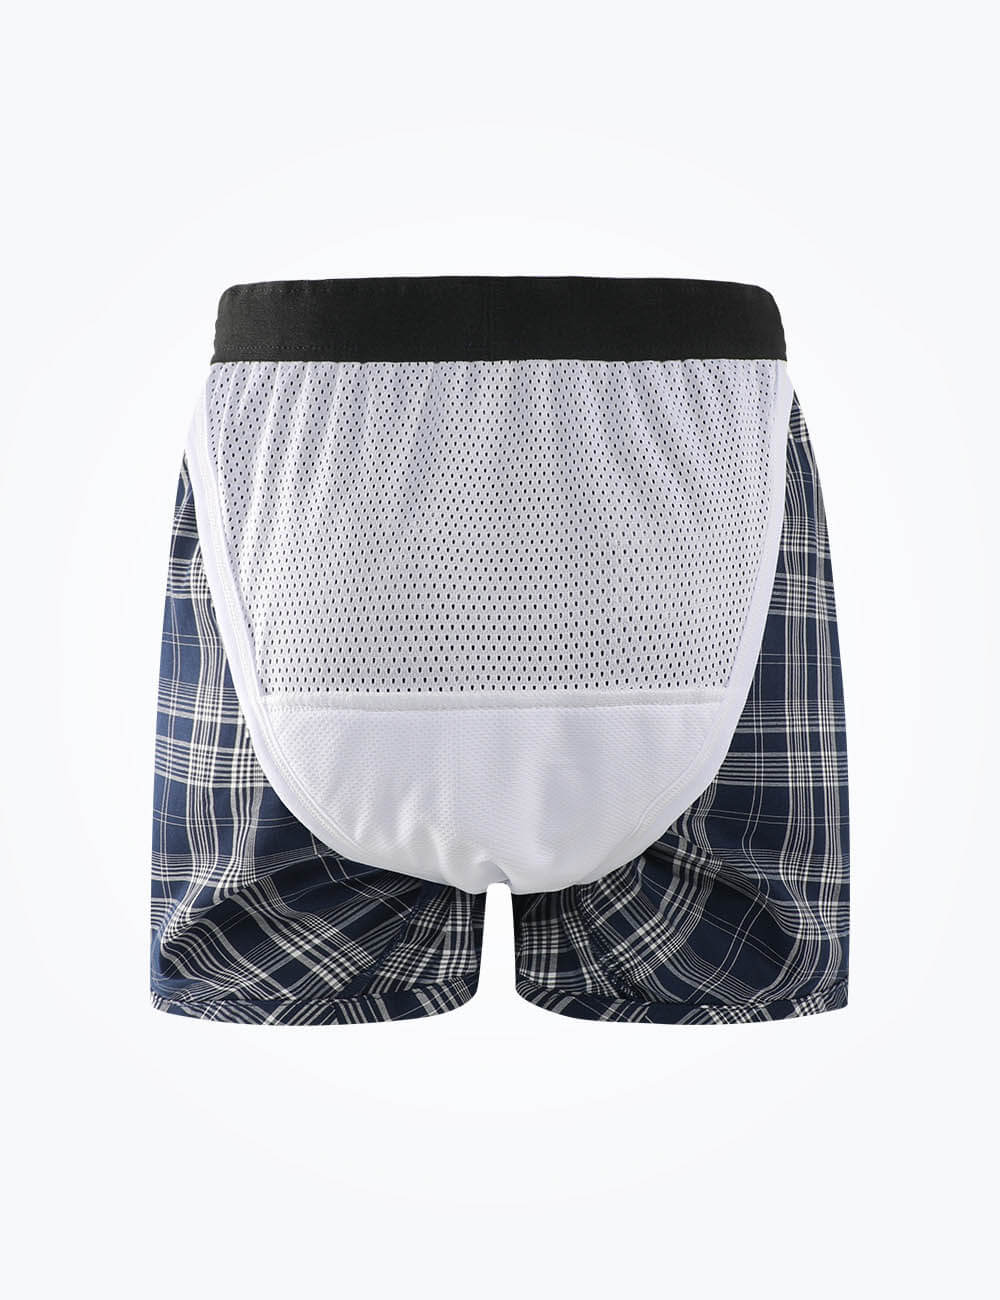 Incontinence Underwear for Men 2 Pack Washable Nepal